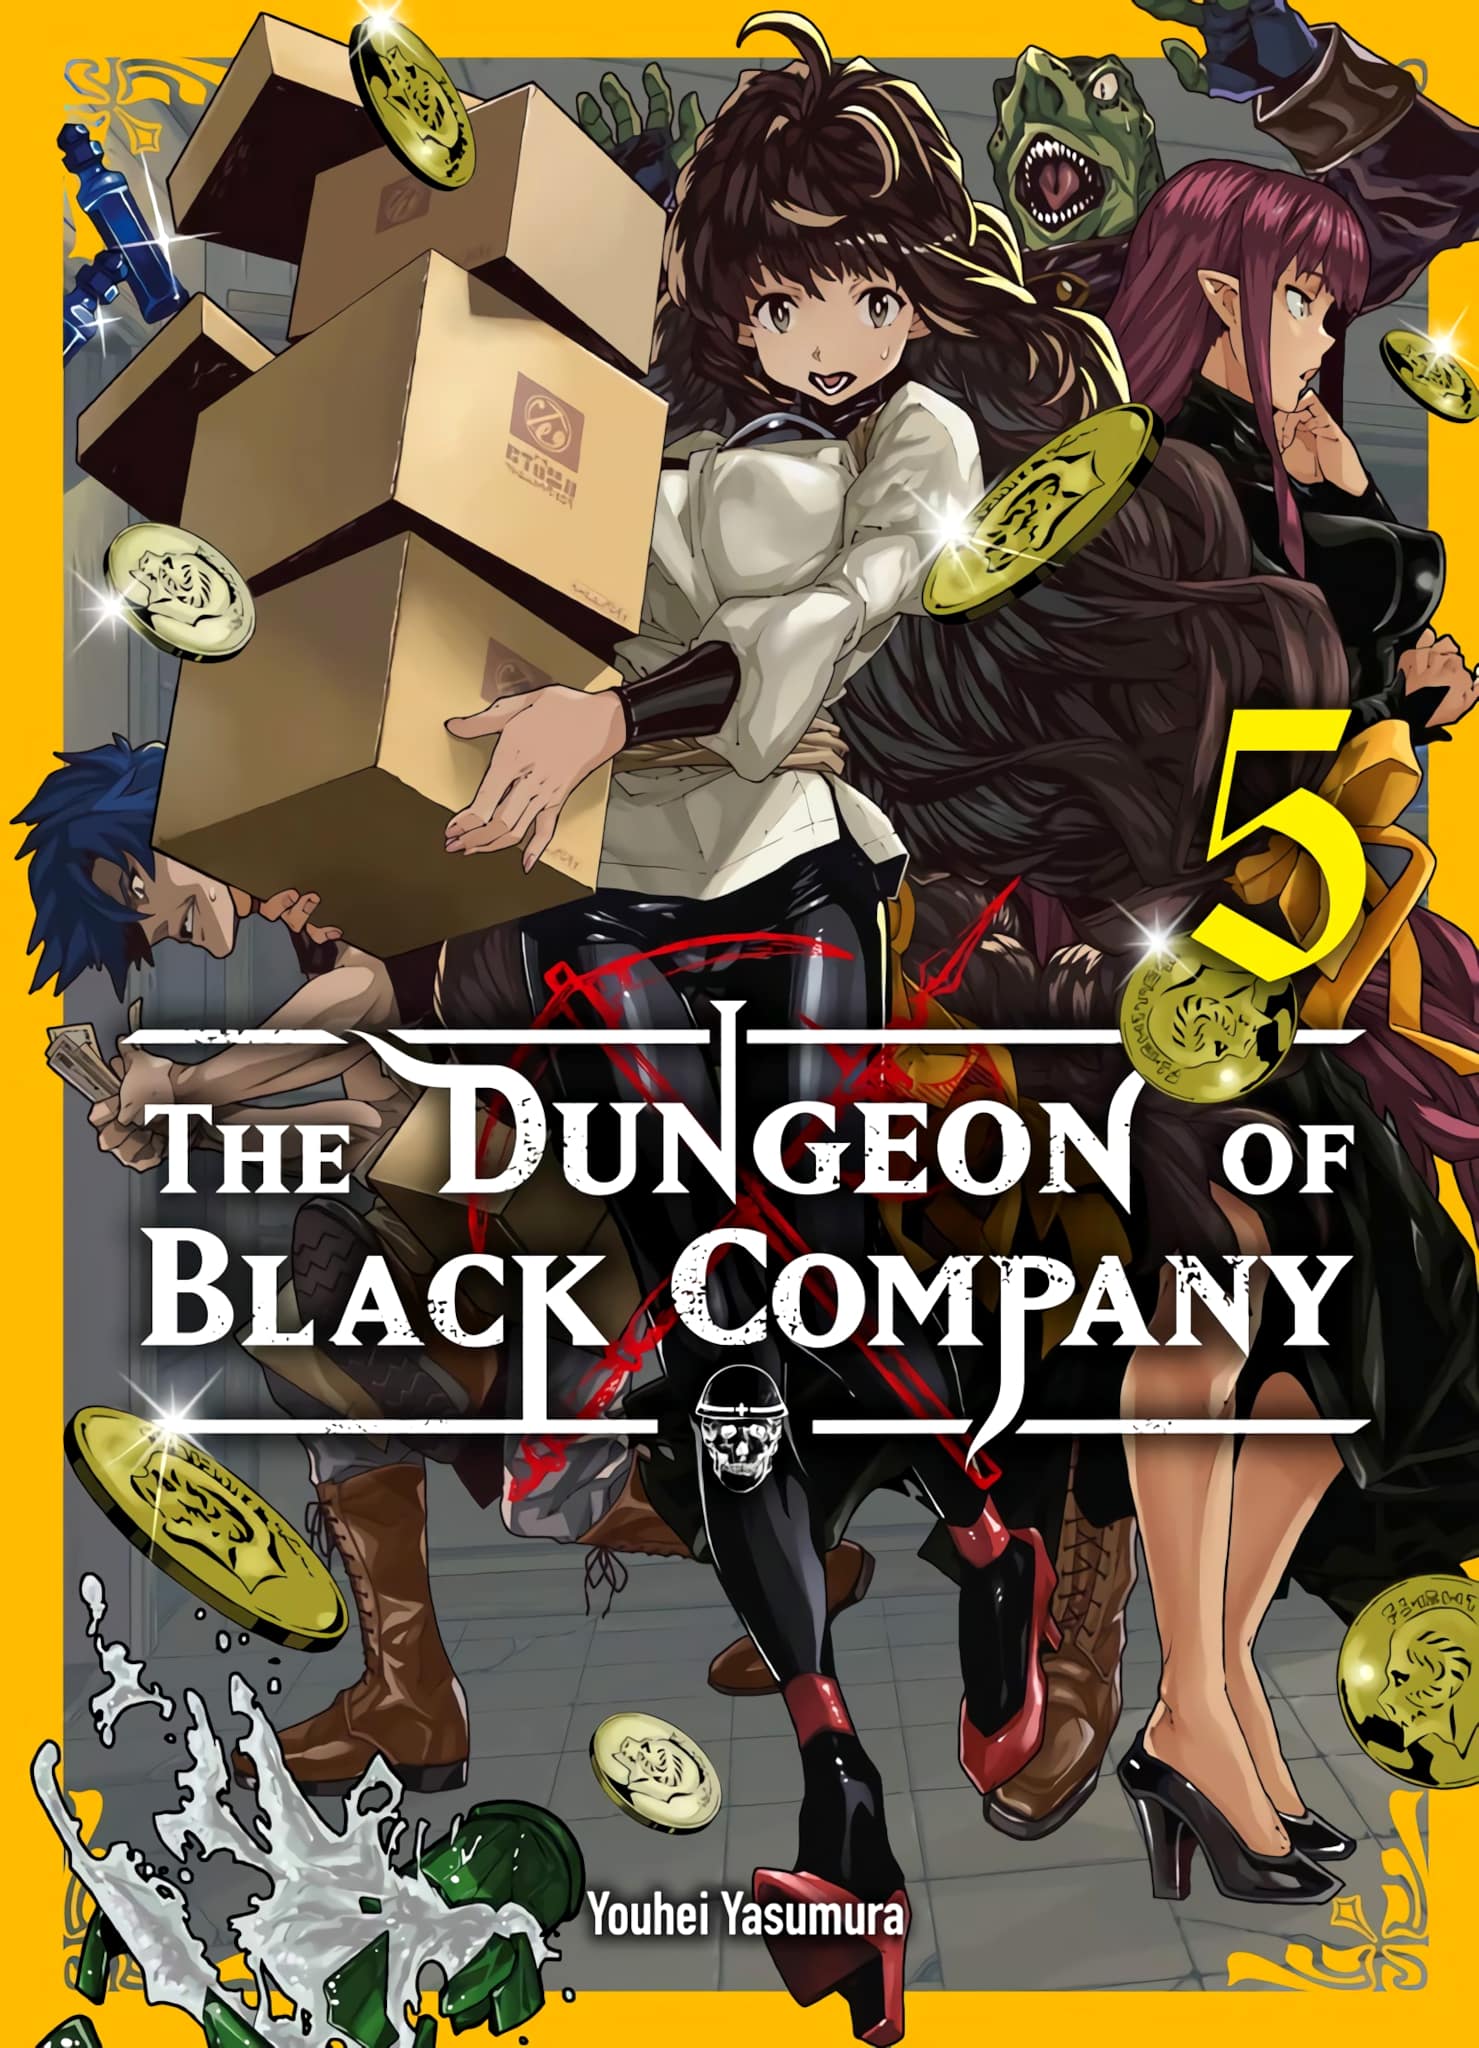 Tome 5 du manga The Dungeon of Black Company